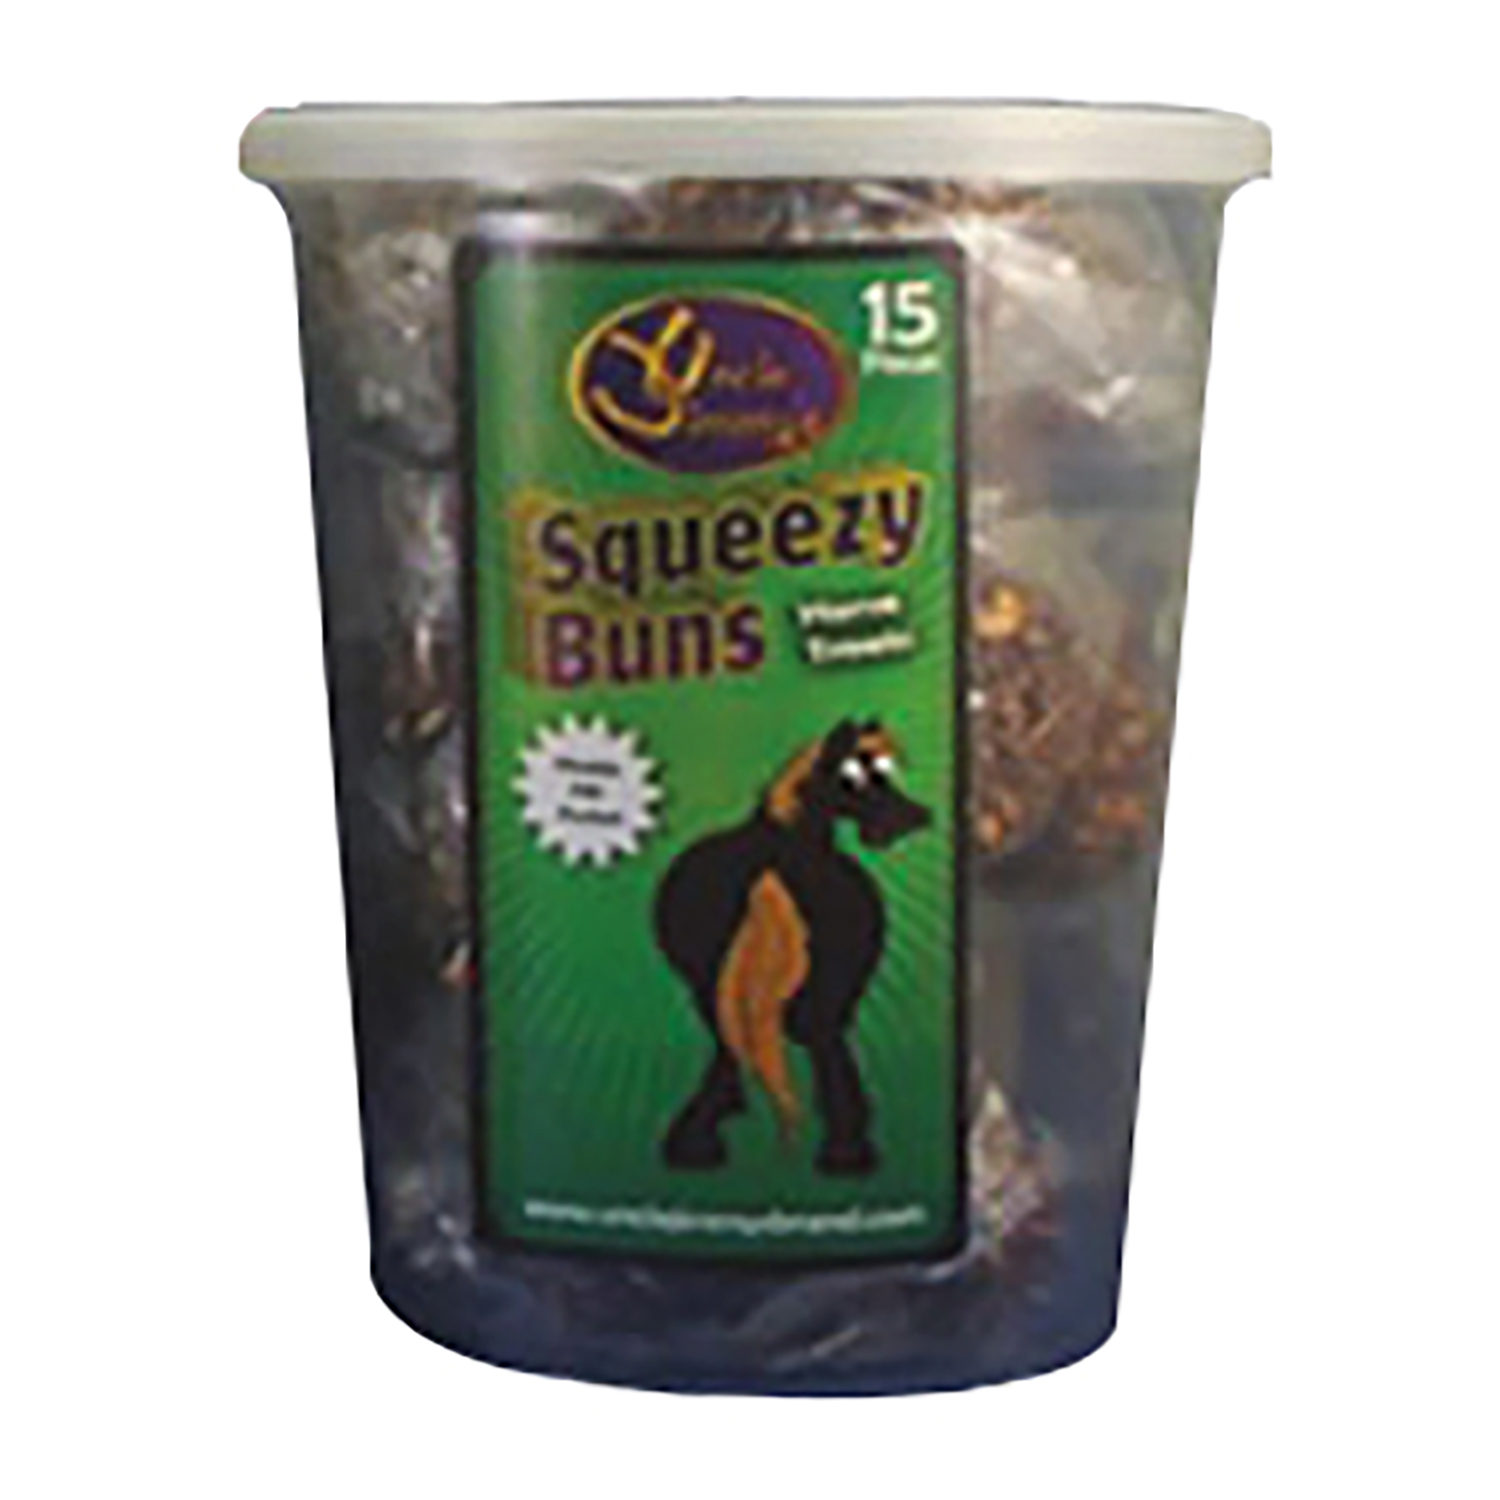 UNCLE JIMMYS SQUEEZY BUNS 15 PACK 15 PACK